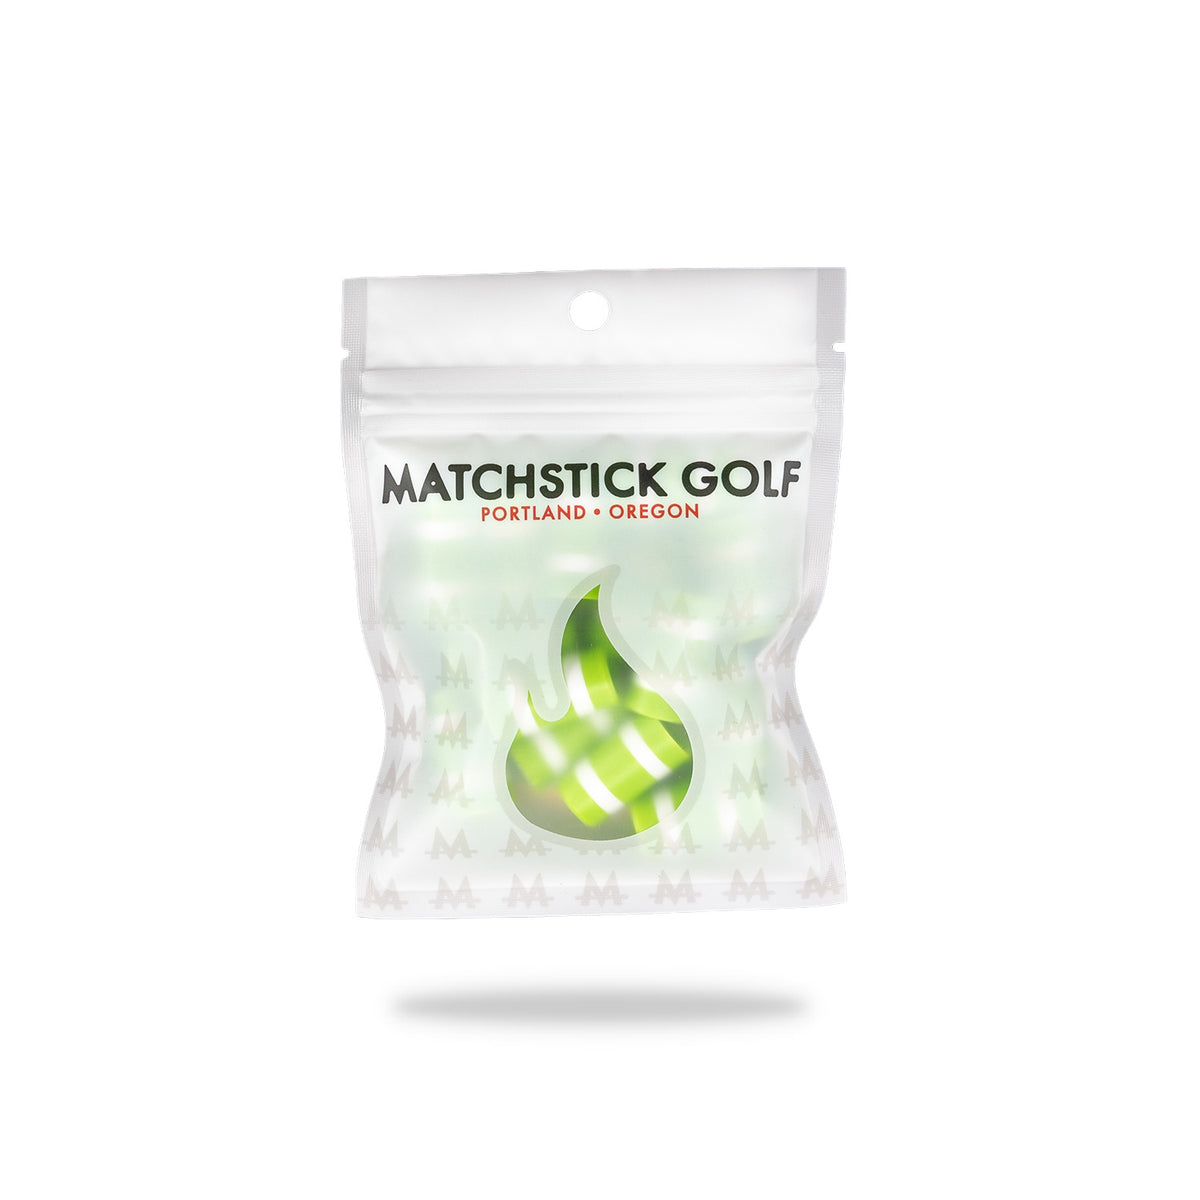 key lime pie green and white golf club ferrules packaging